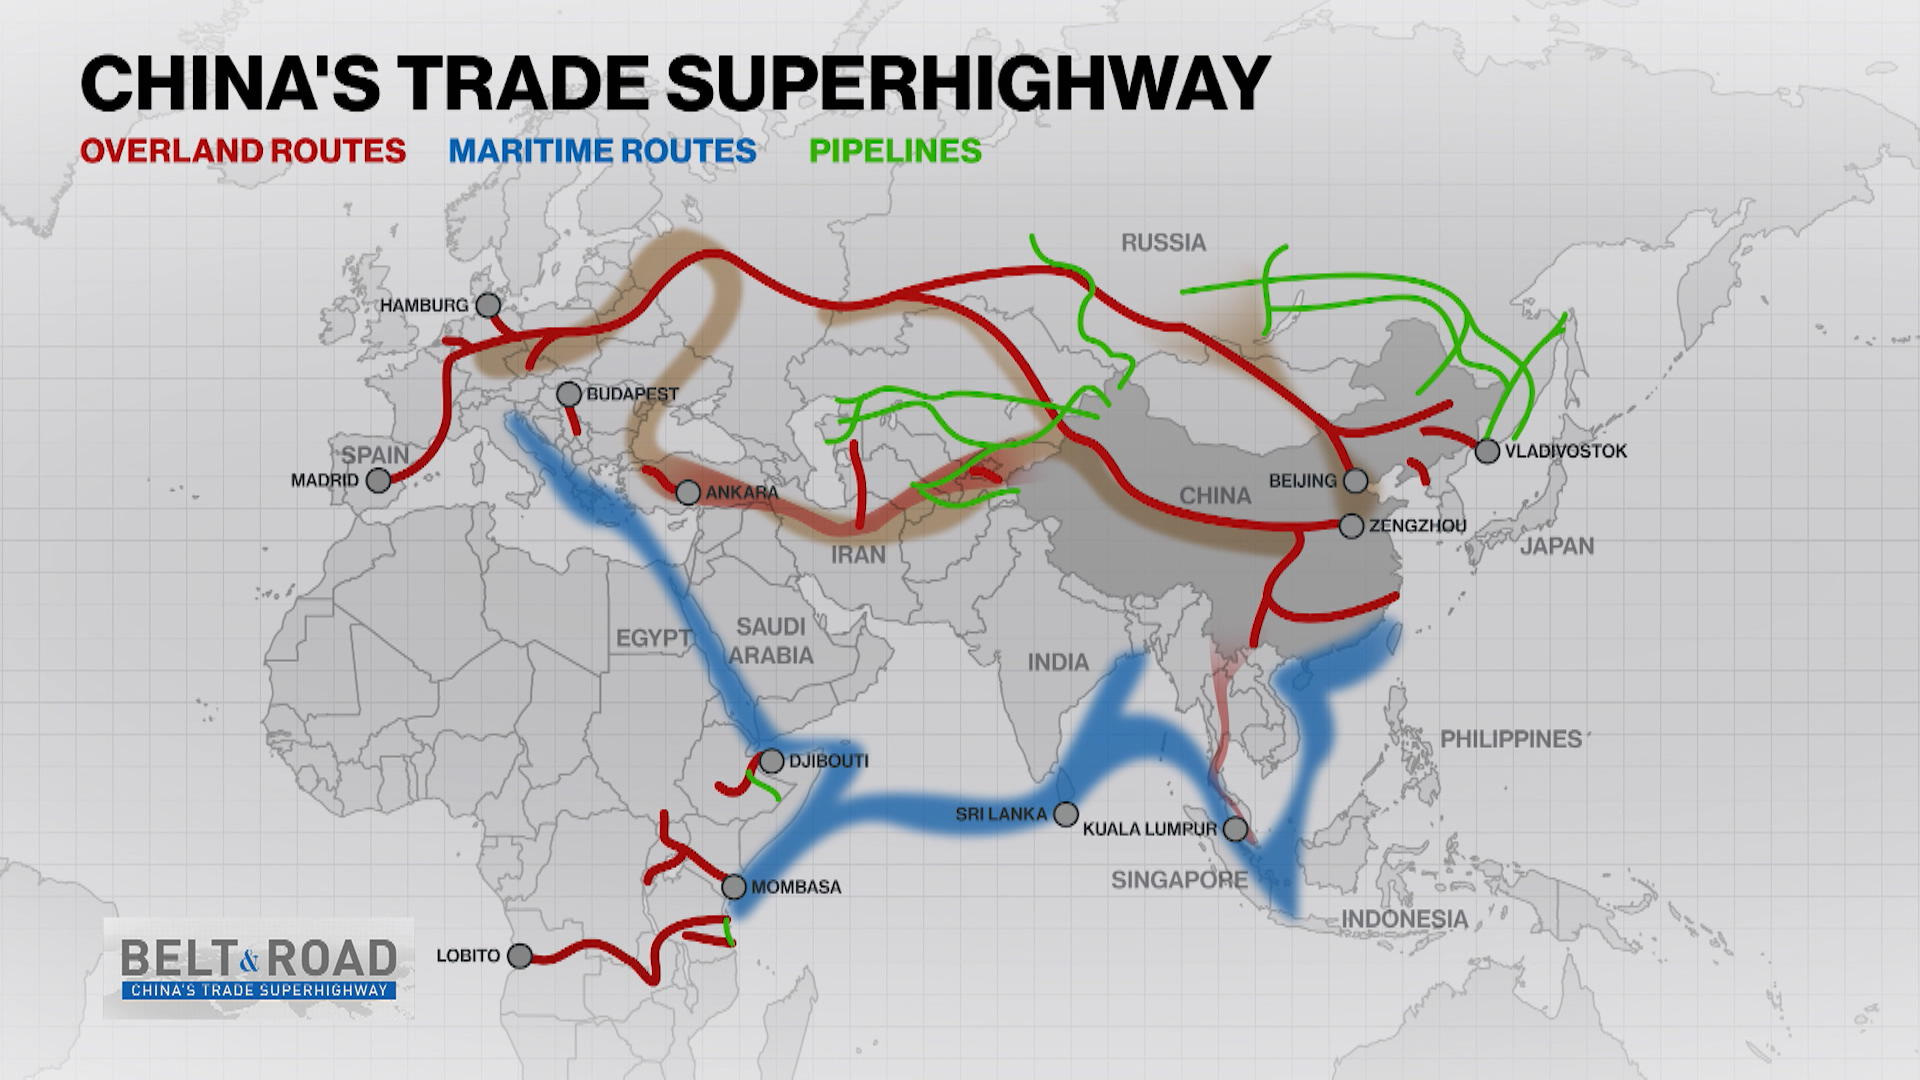 Typical Belt and Road Graphics